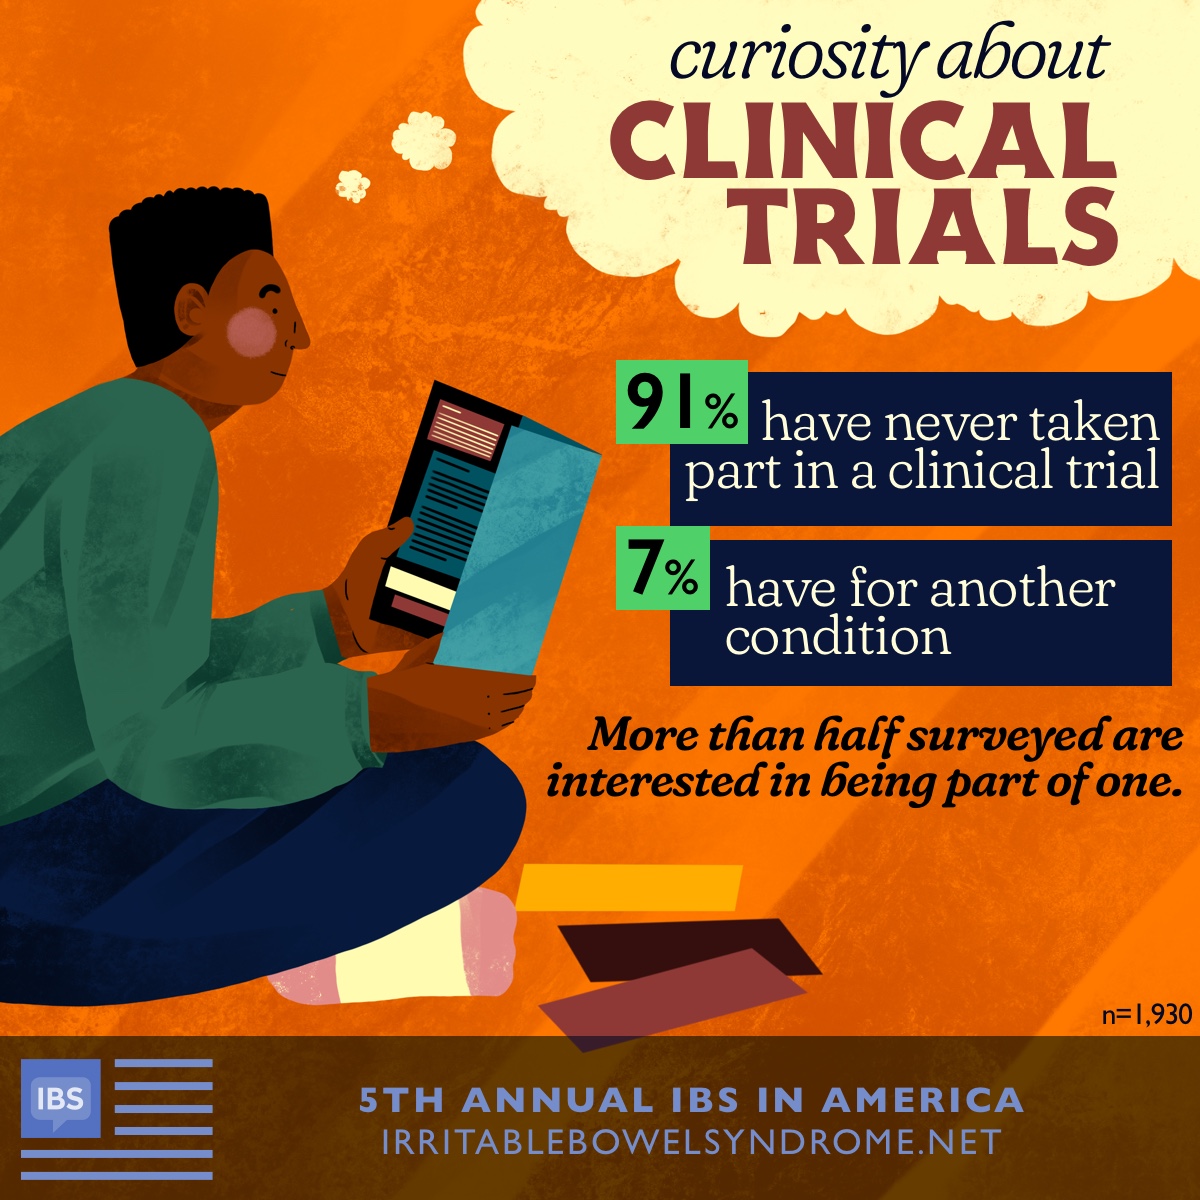 Infographic featuring a man looking at pamphlets, thinking about clinical trials. Data shows 91% have never taken part in a clinical trial, and 7% have for another condition.